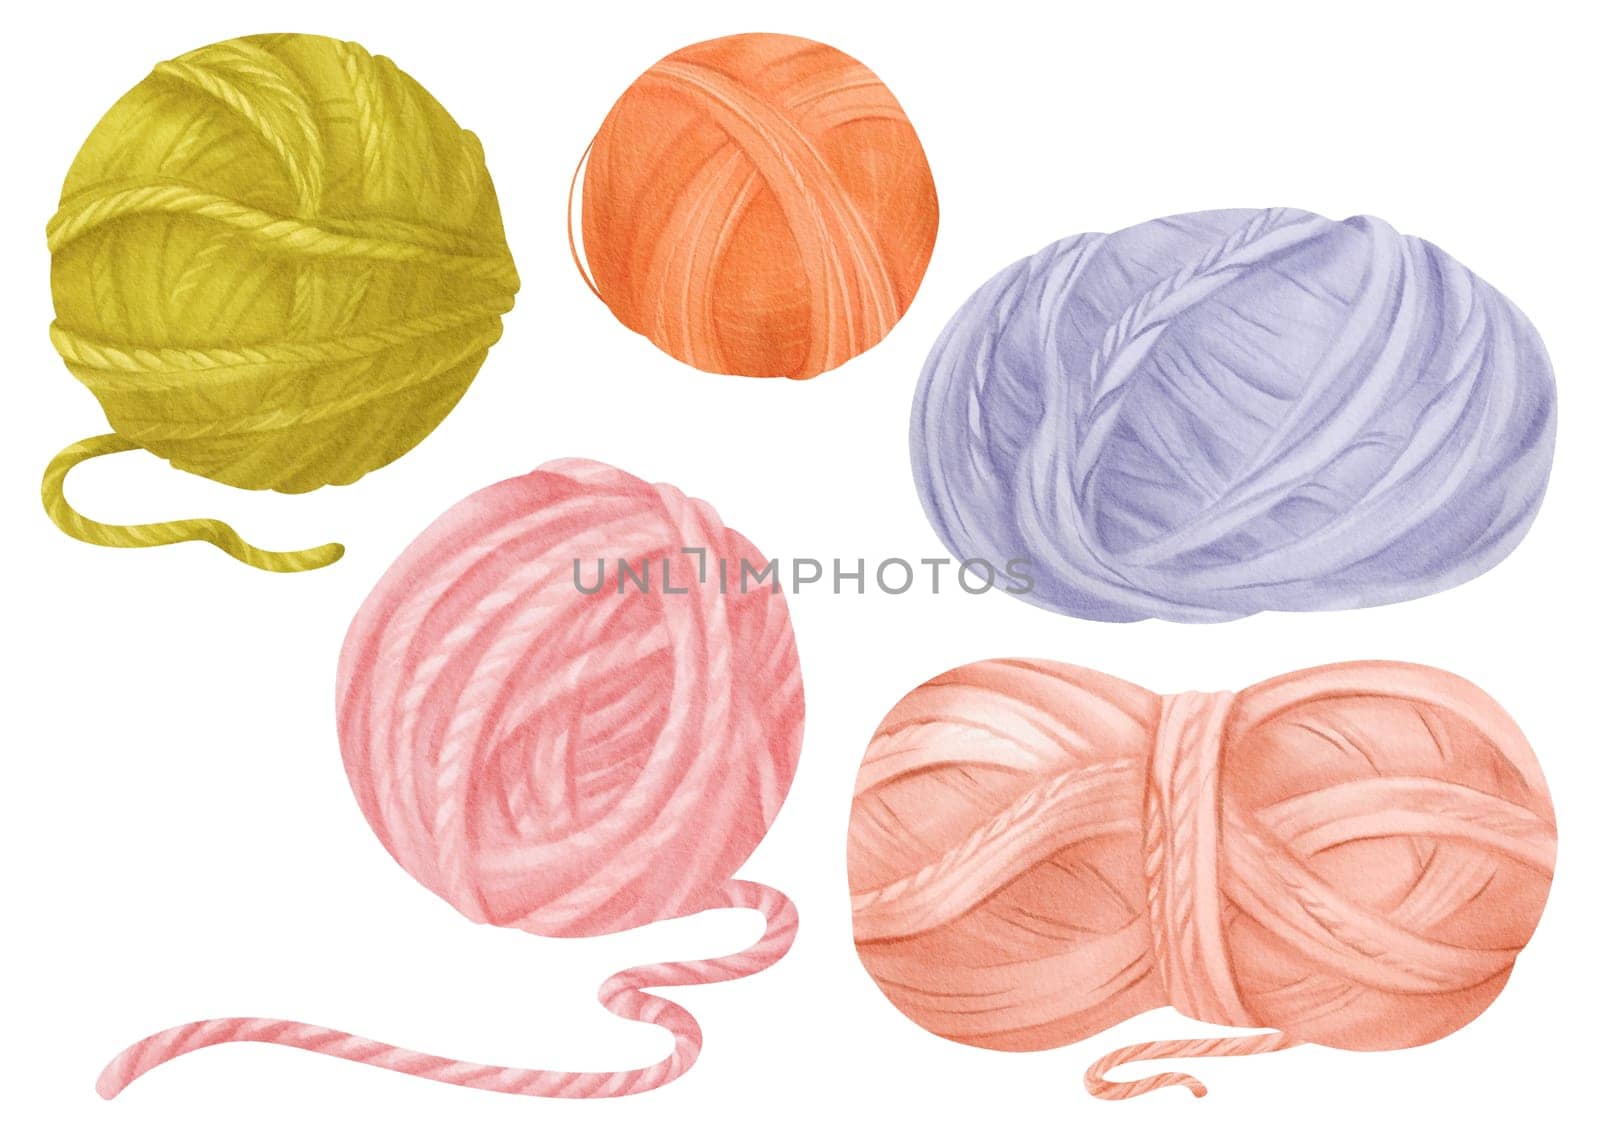 Watercolor set of knitting yarn balls. Isolated objects featuring cotton and wool threads in orange, green, blue, and pink colors. for crafting enthusiasts, knitting tutorials and needlework shops by Art_Mari_Ka